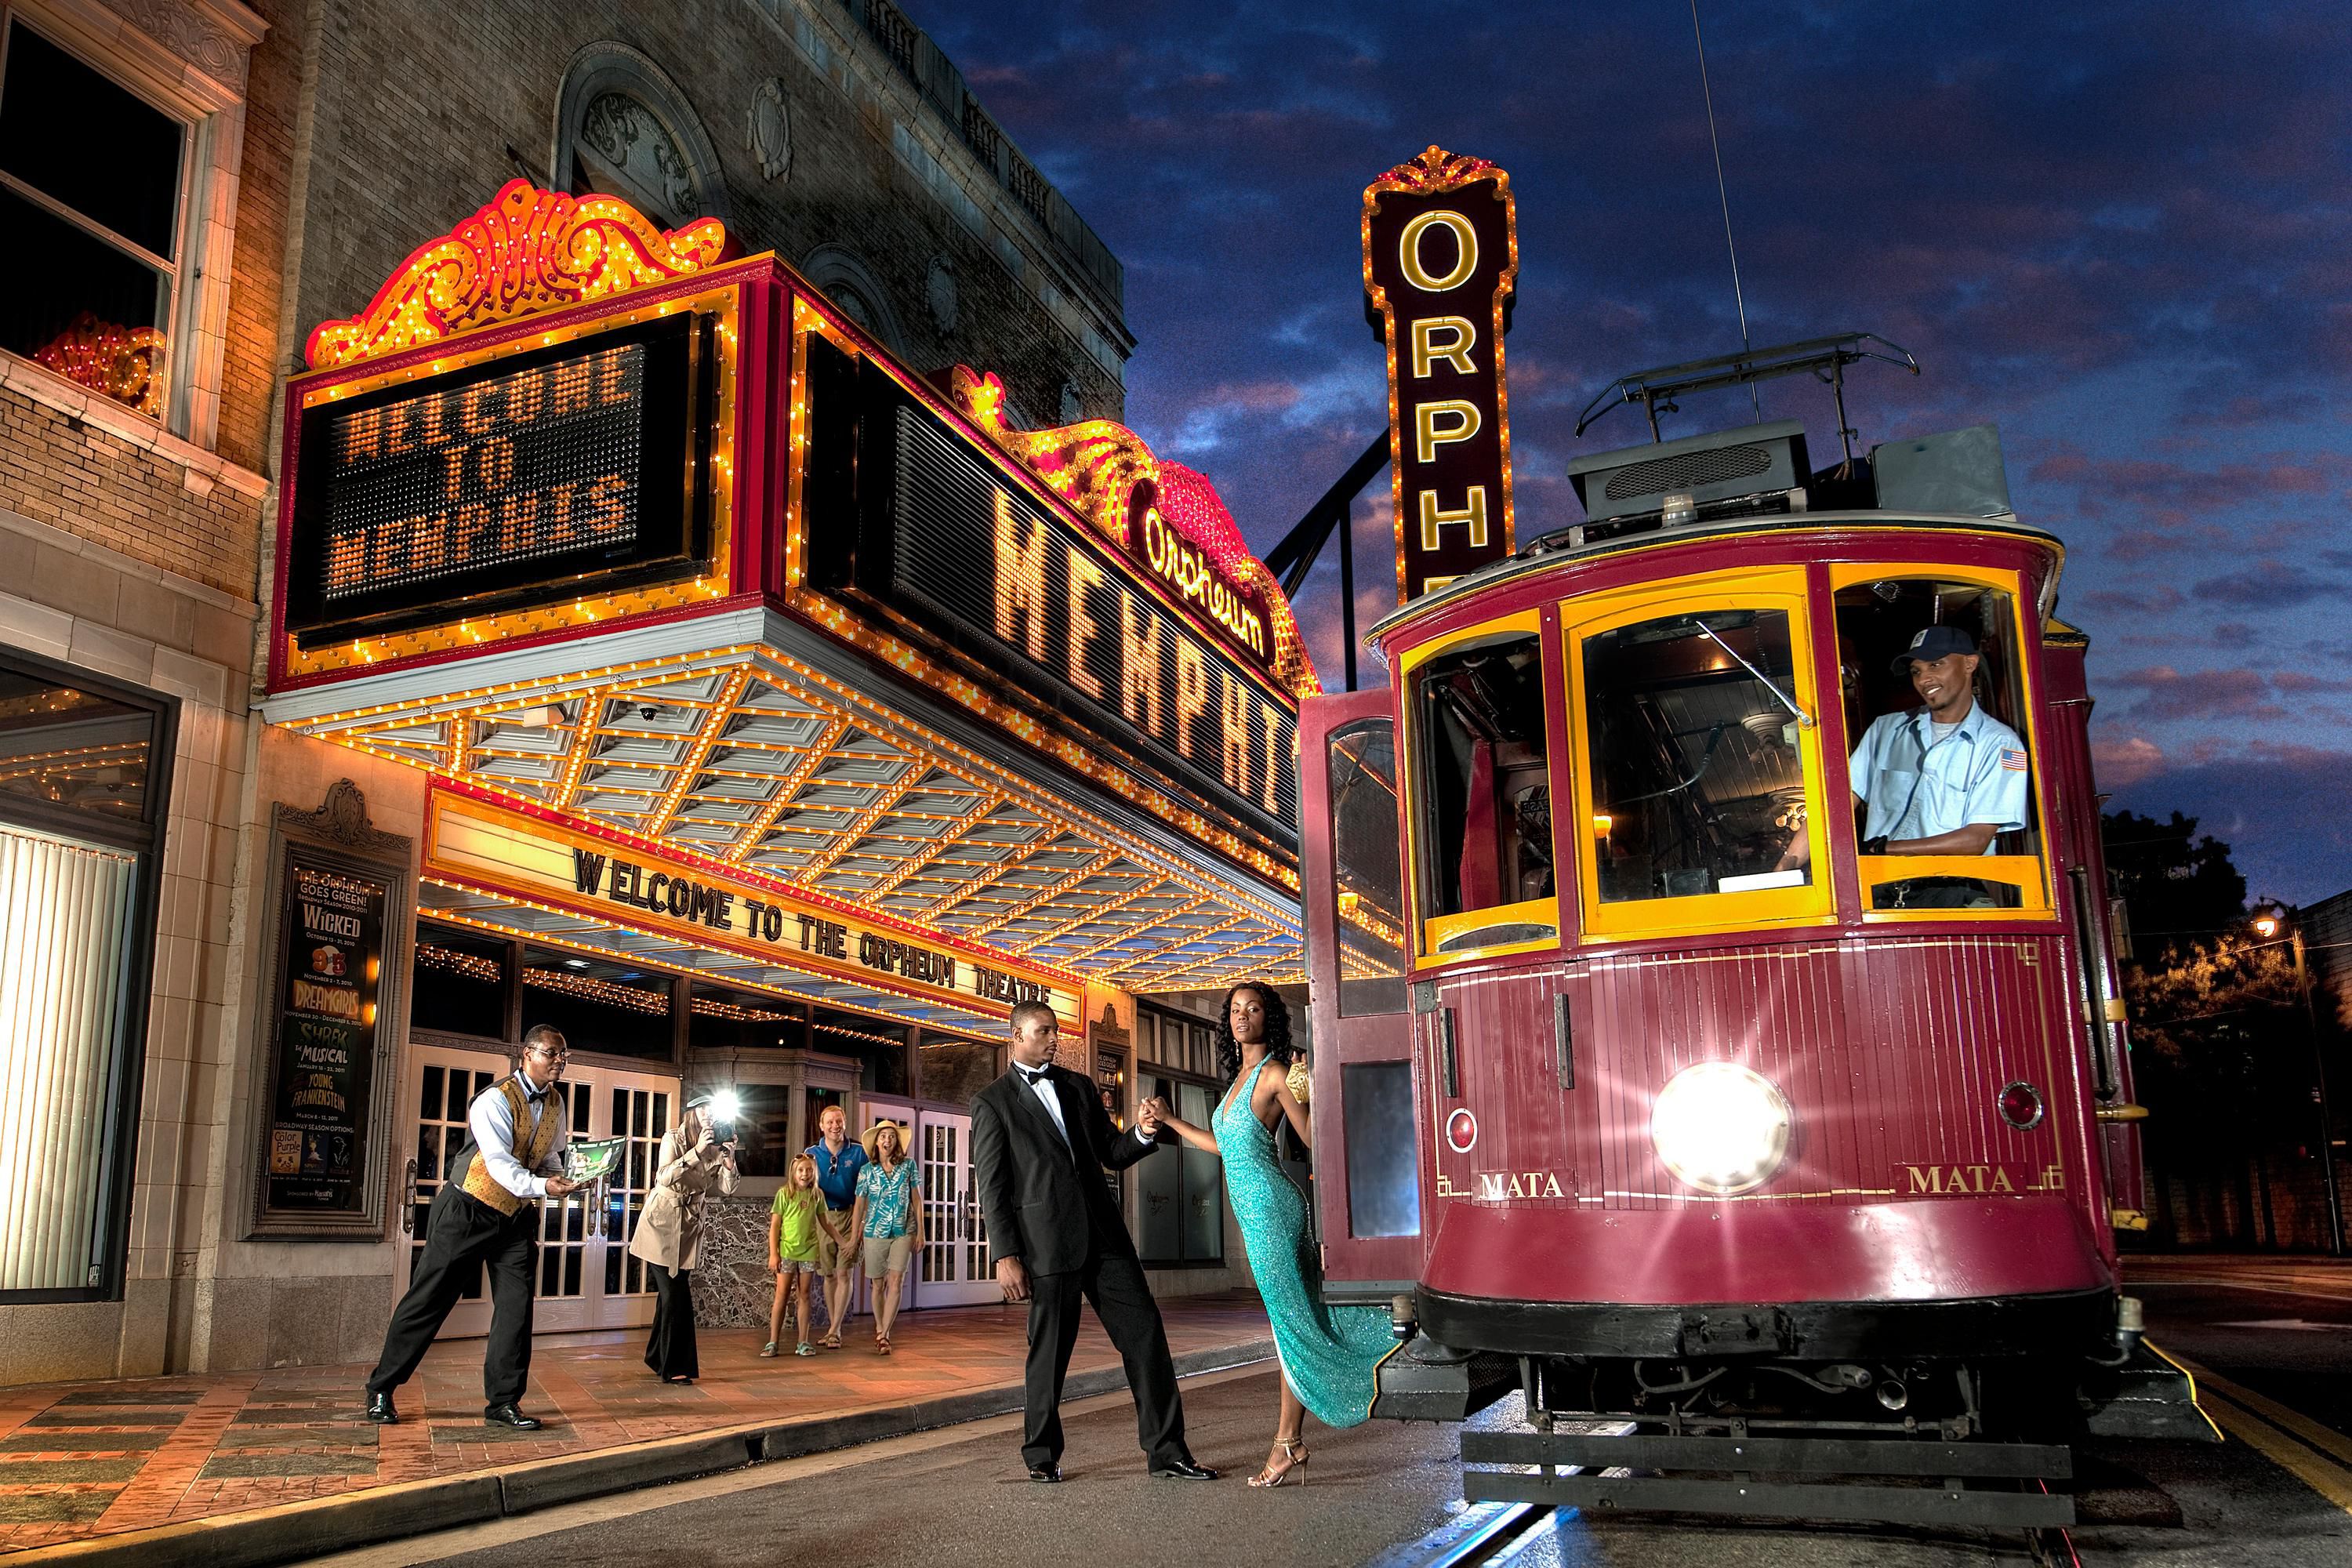 Take our free shuttle for a night out at The Orpheum Theatre